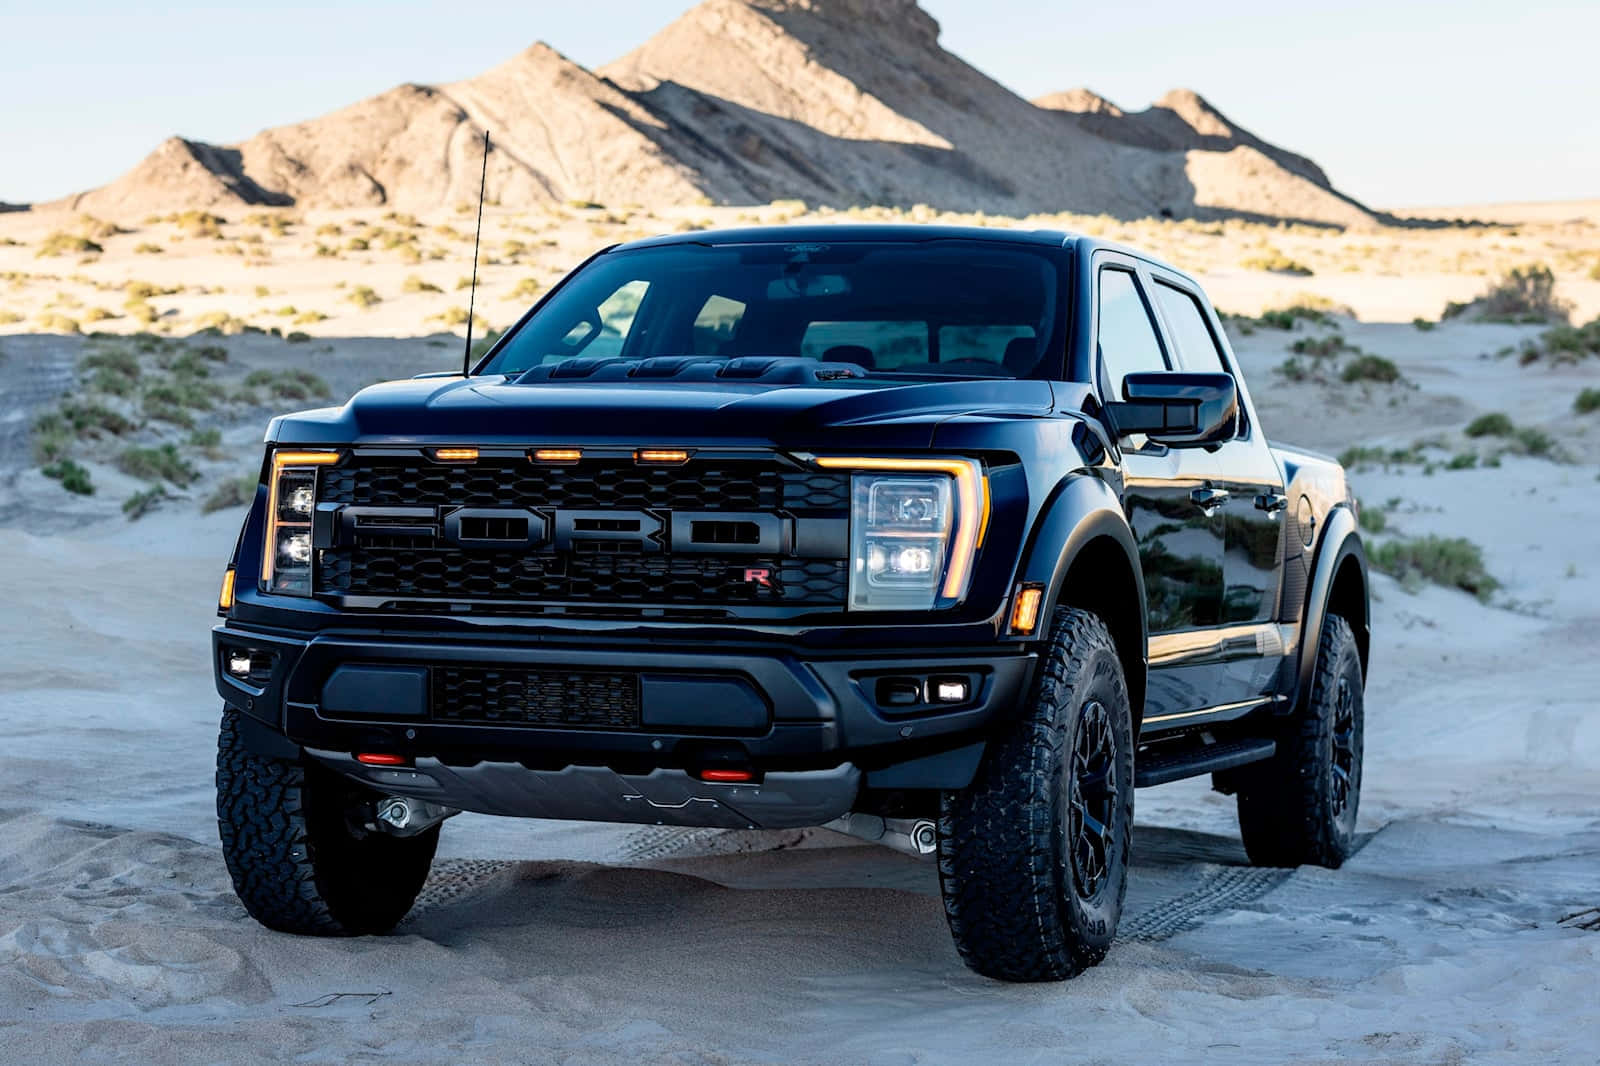 The Sturdy and Powerful Ford F 150 Wallpaper